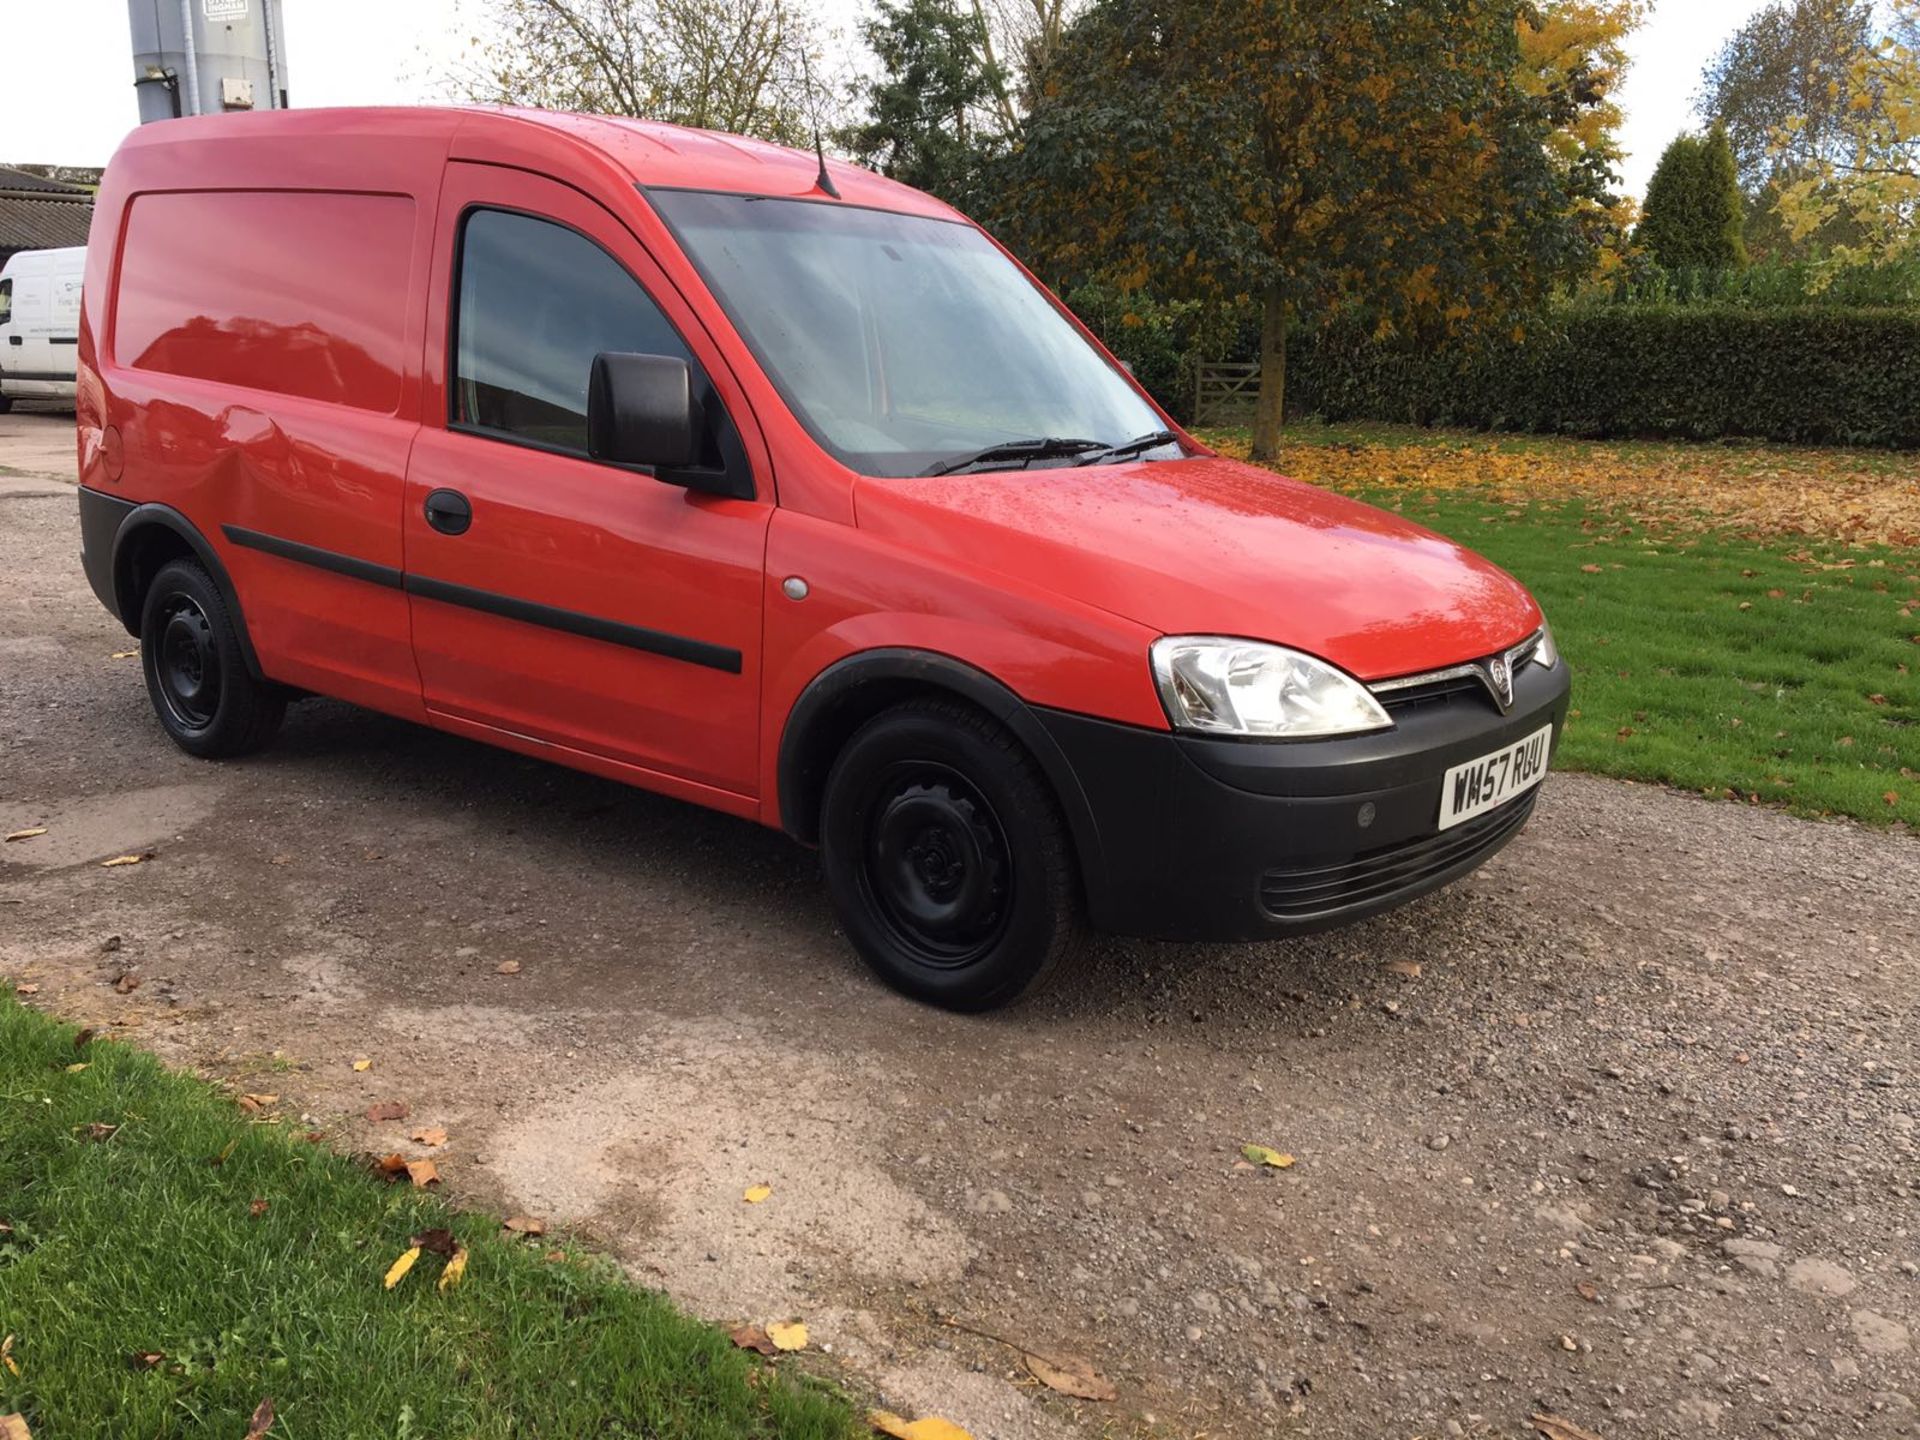 2008/57 REG VAUXHALL COMBO 1700 CDTI S-A, SHOWING 1 OWNER FROM NEW *NO VAT*